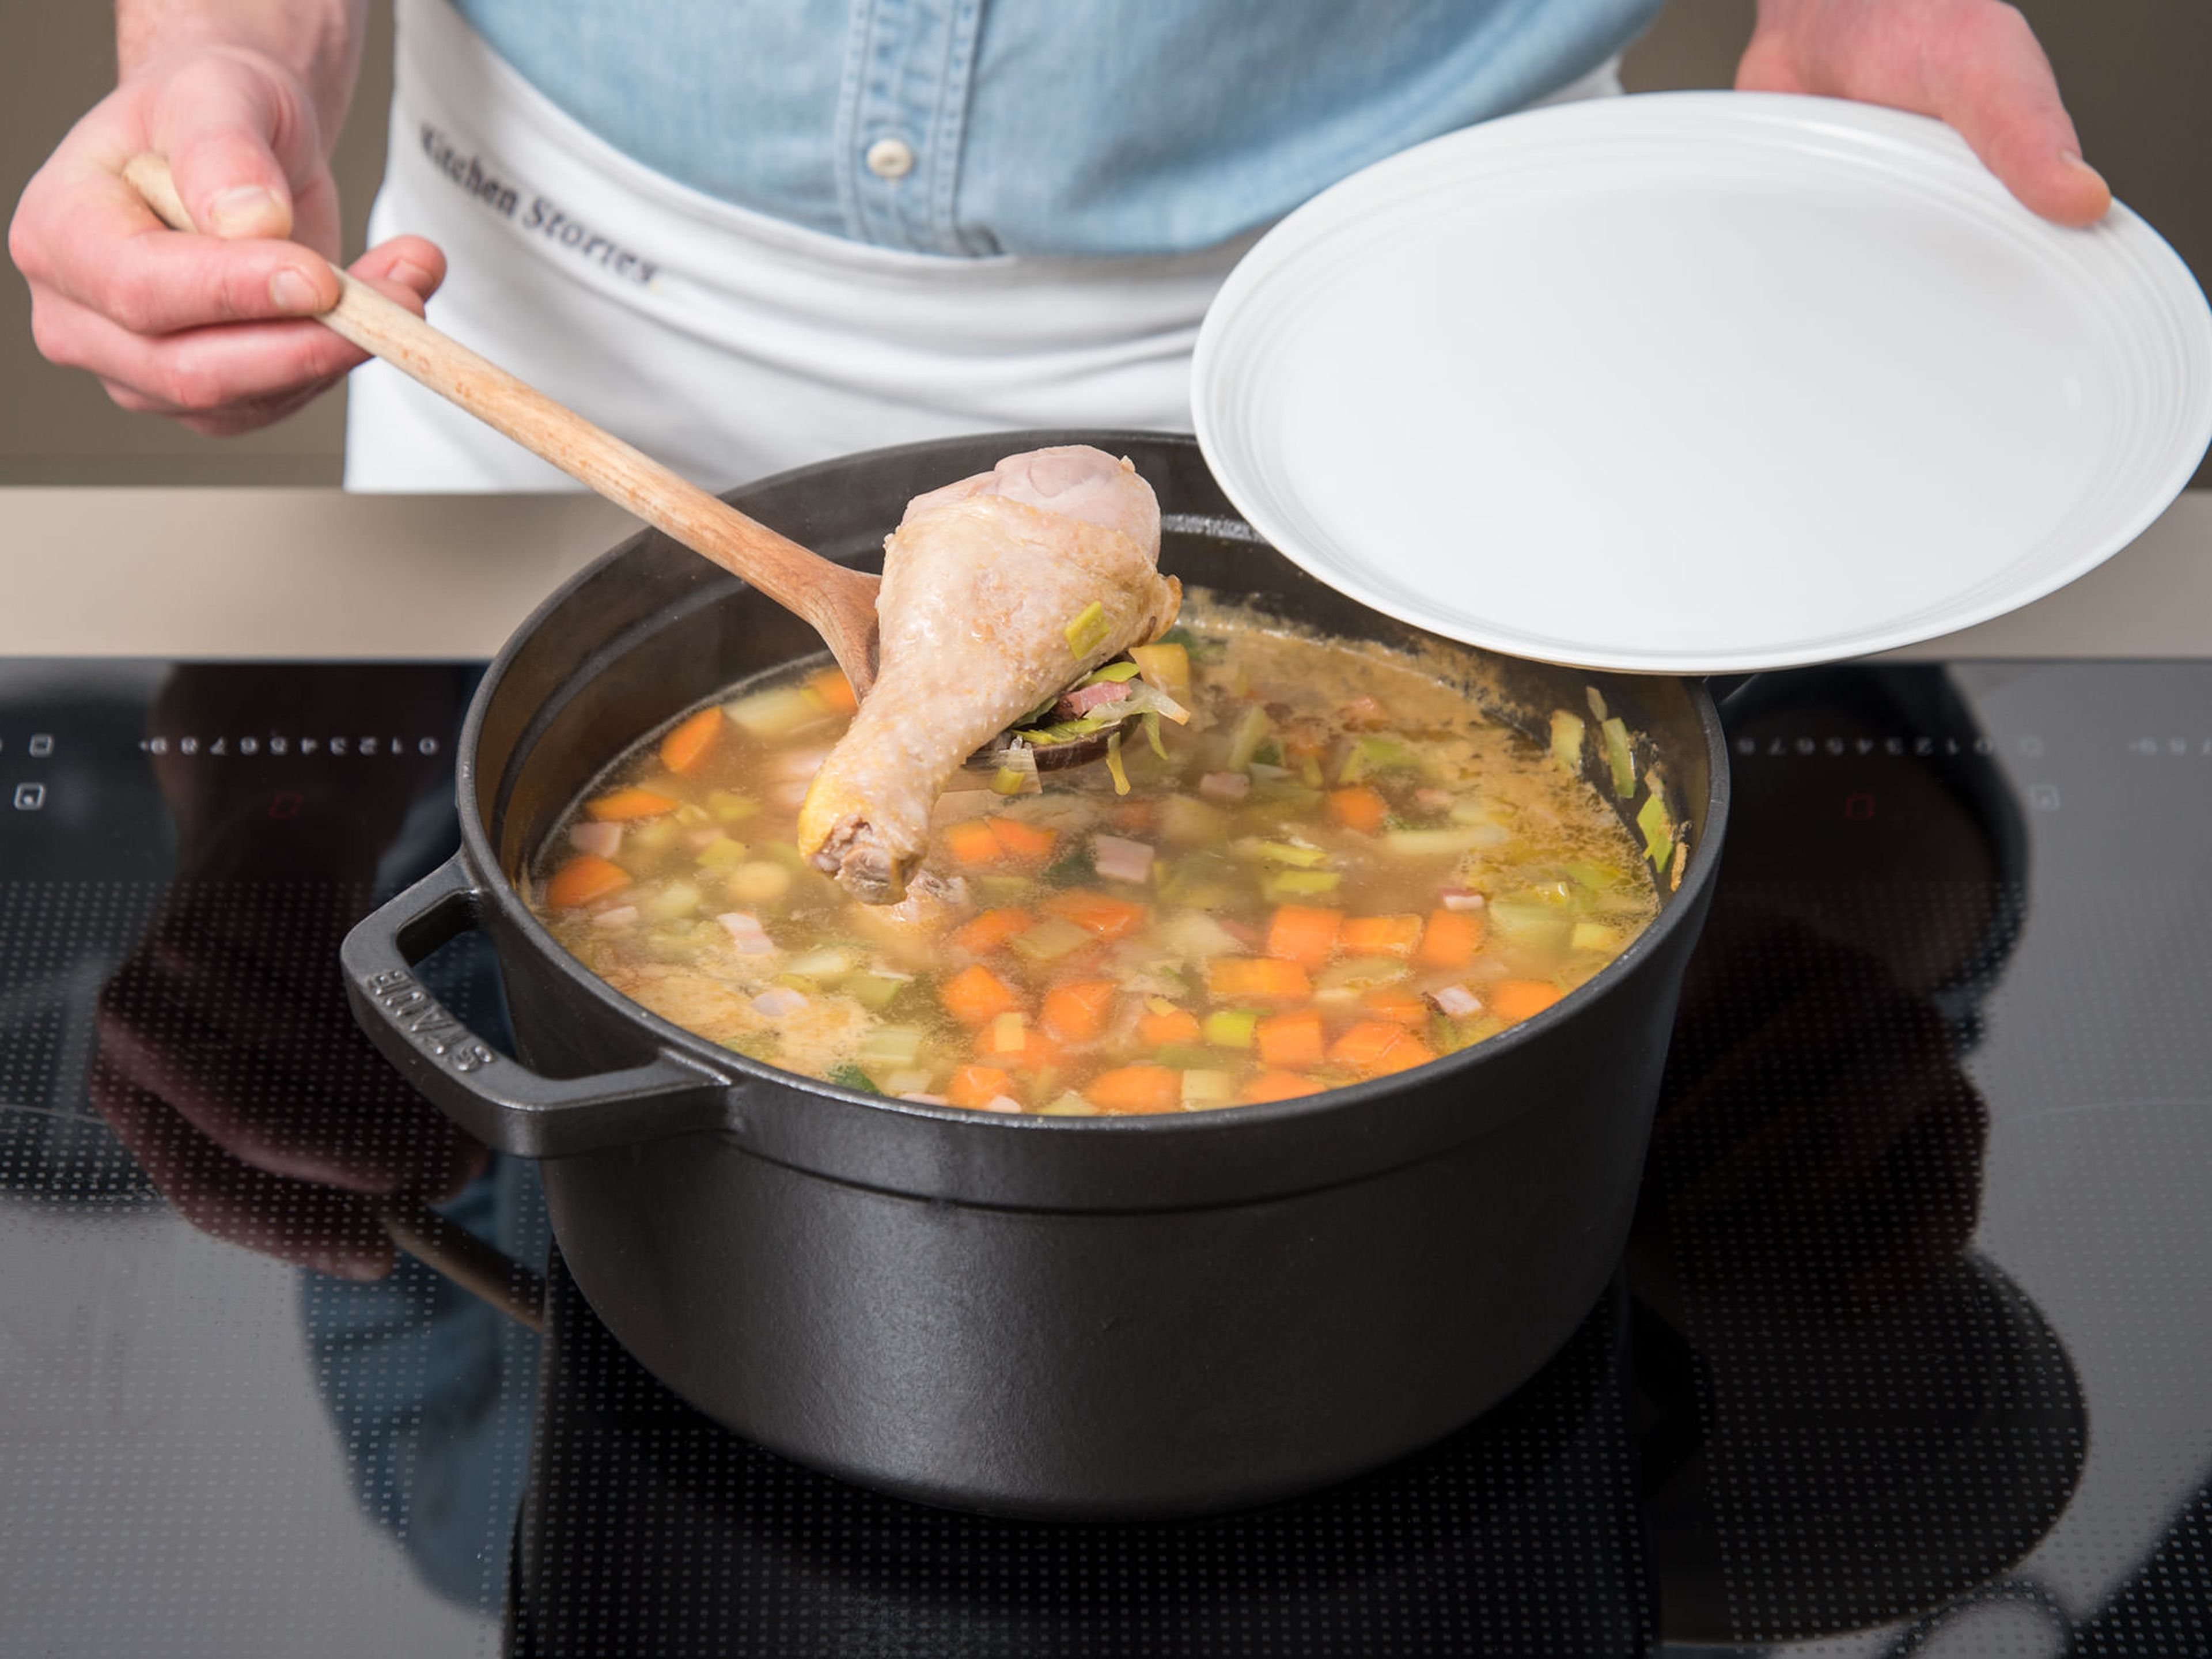 Remove chicken drumsticks from the pot. Set aside and allow to cool. In the meantime, add the egg noodles to the pot and cook, covered, for approx. 10 min.